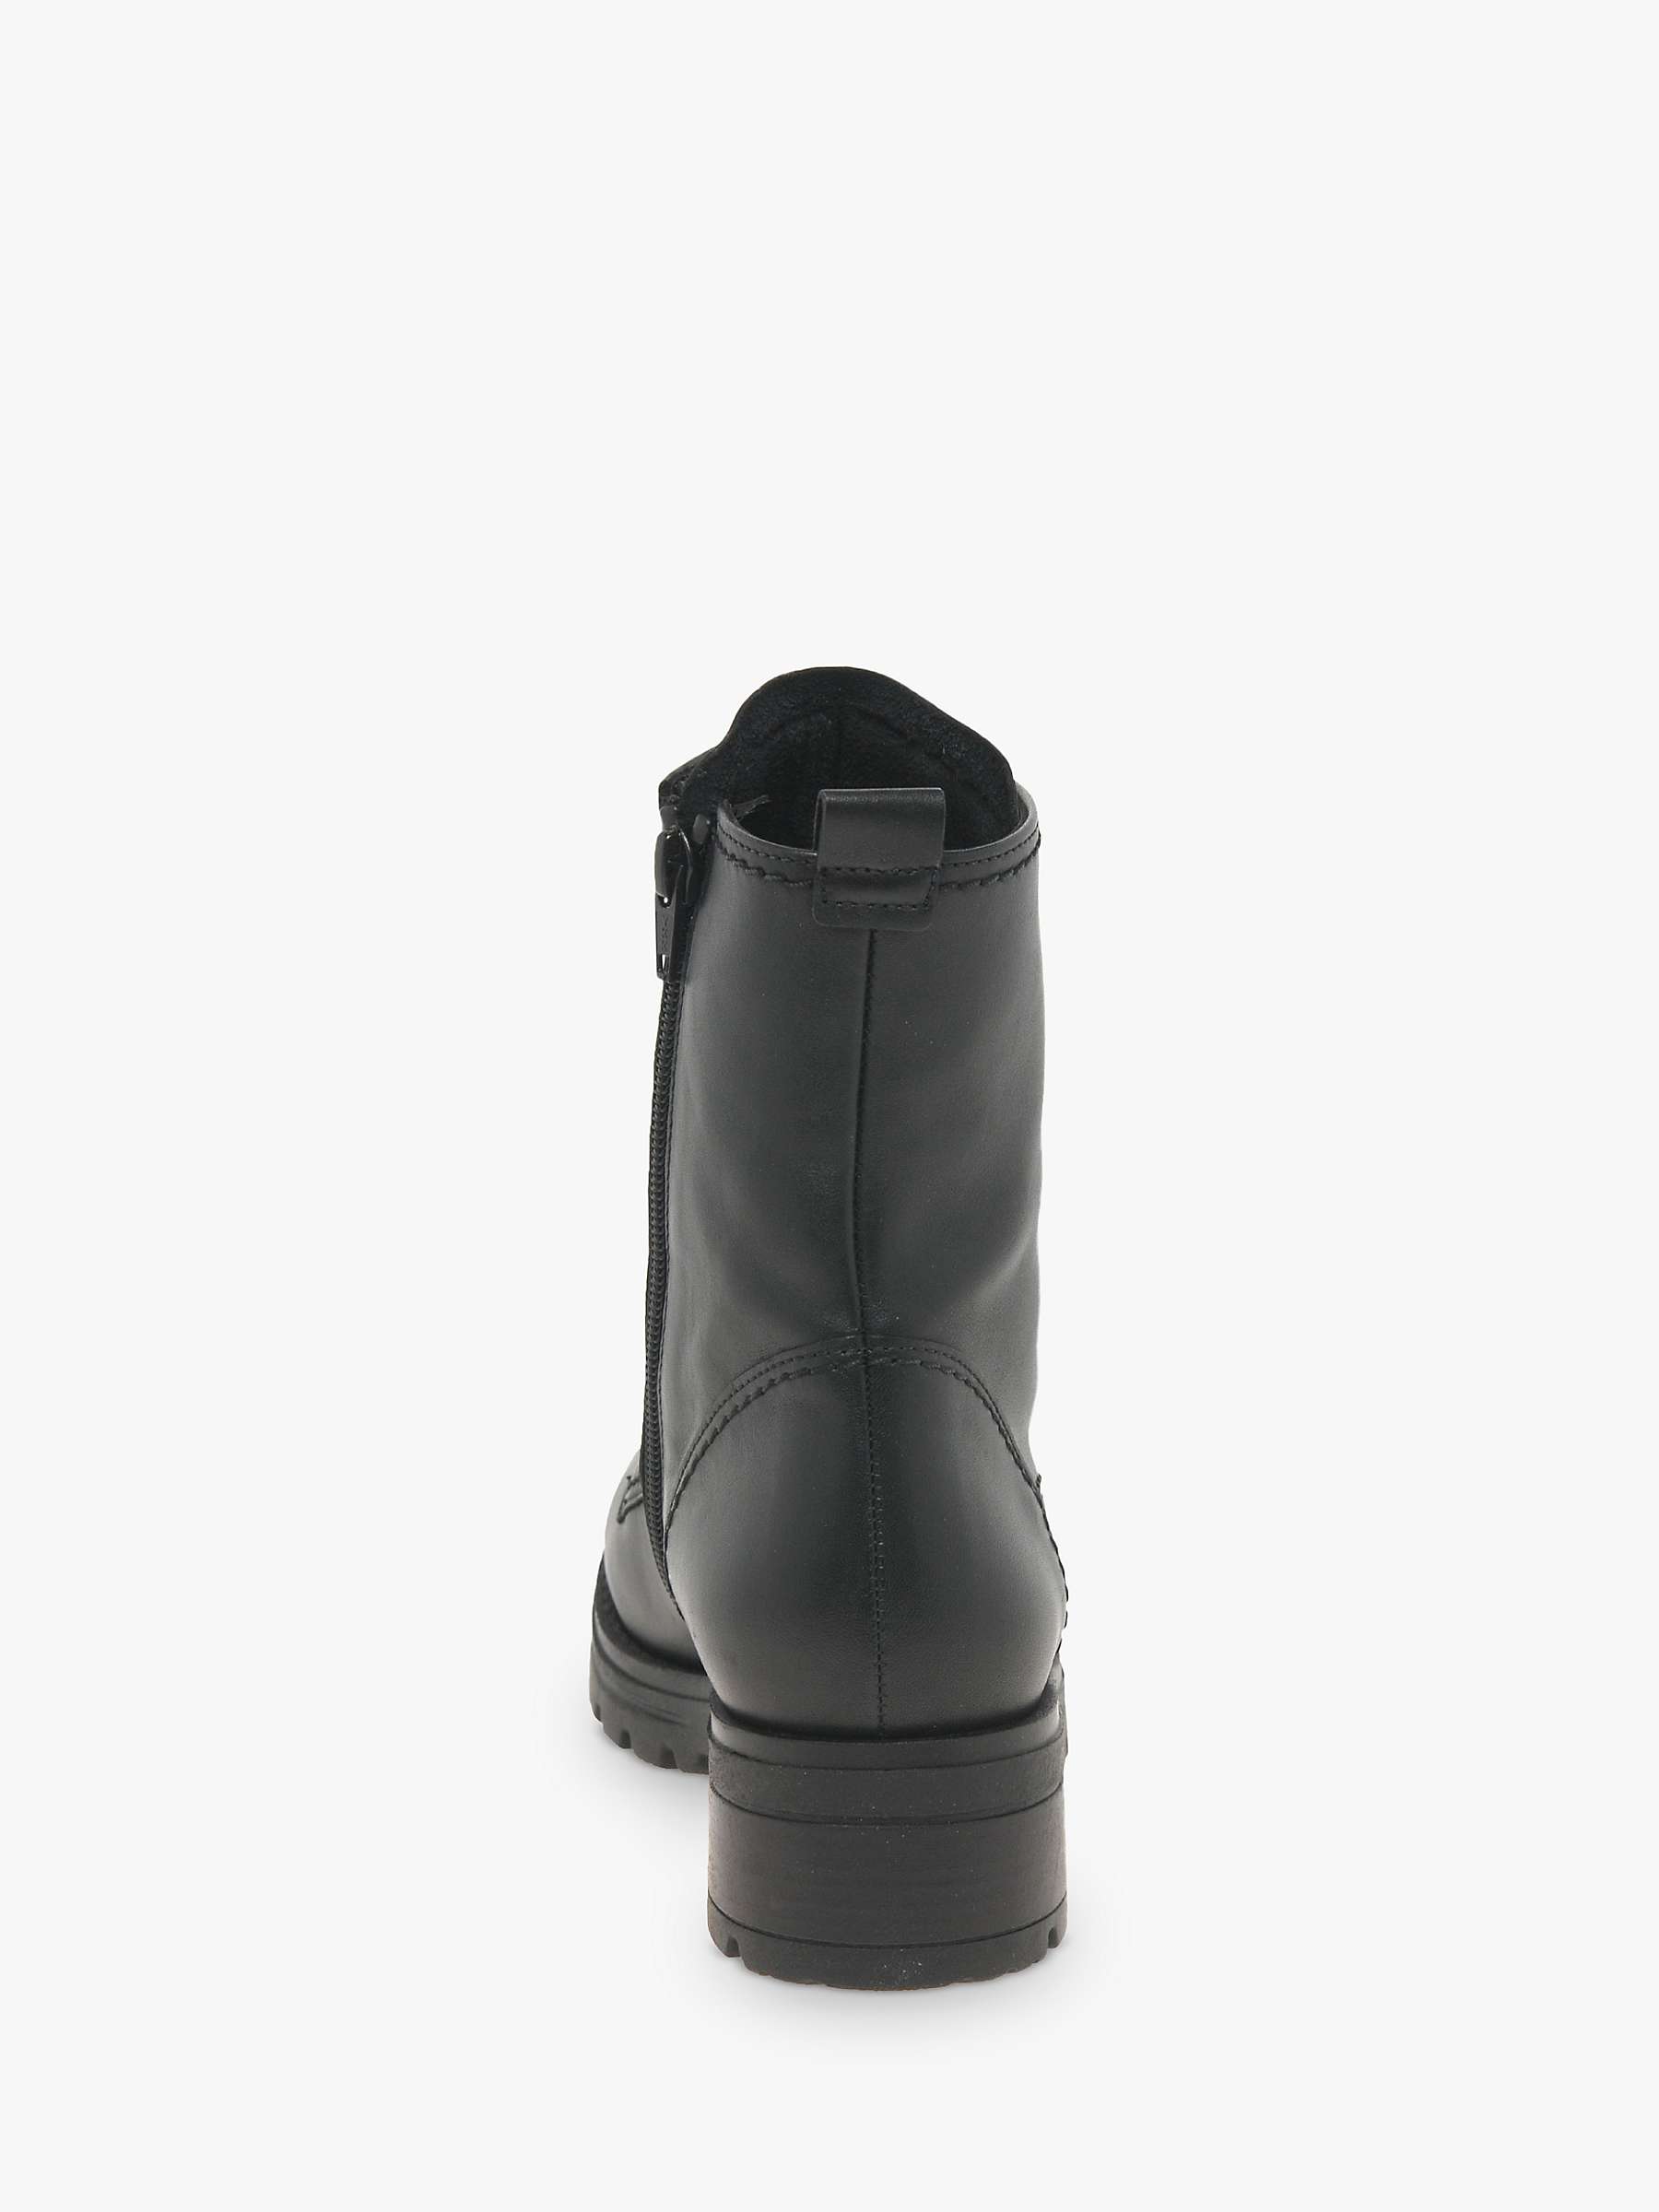 Gabor Sea Wide Fit Leather Biker Boots, Black at John Lewis & Partners